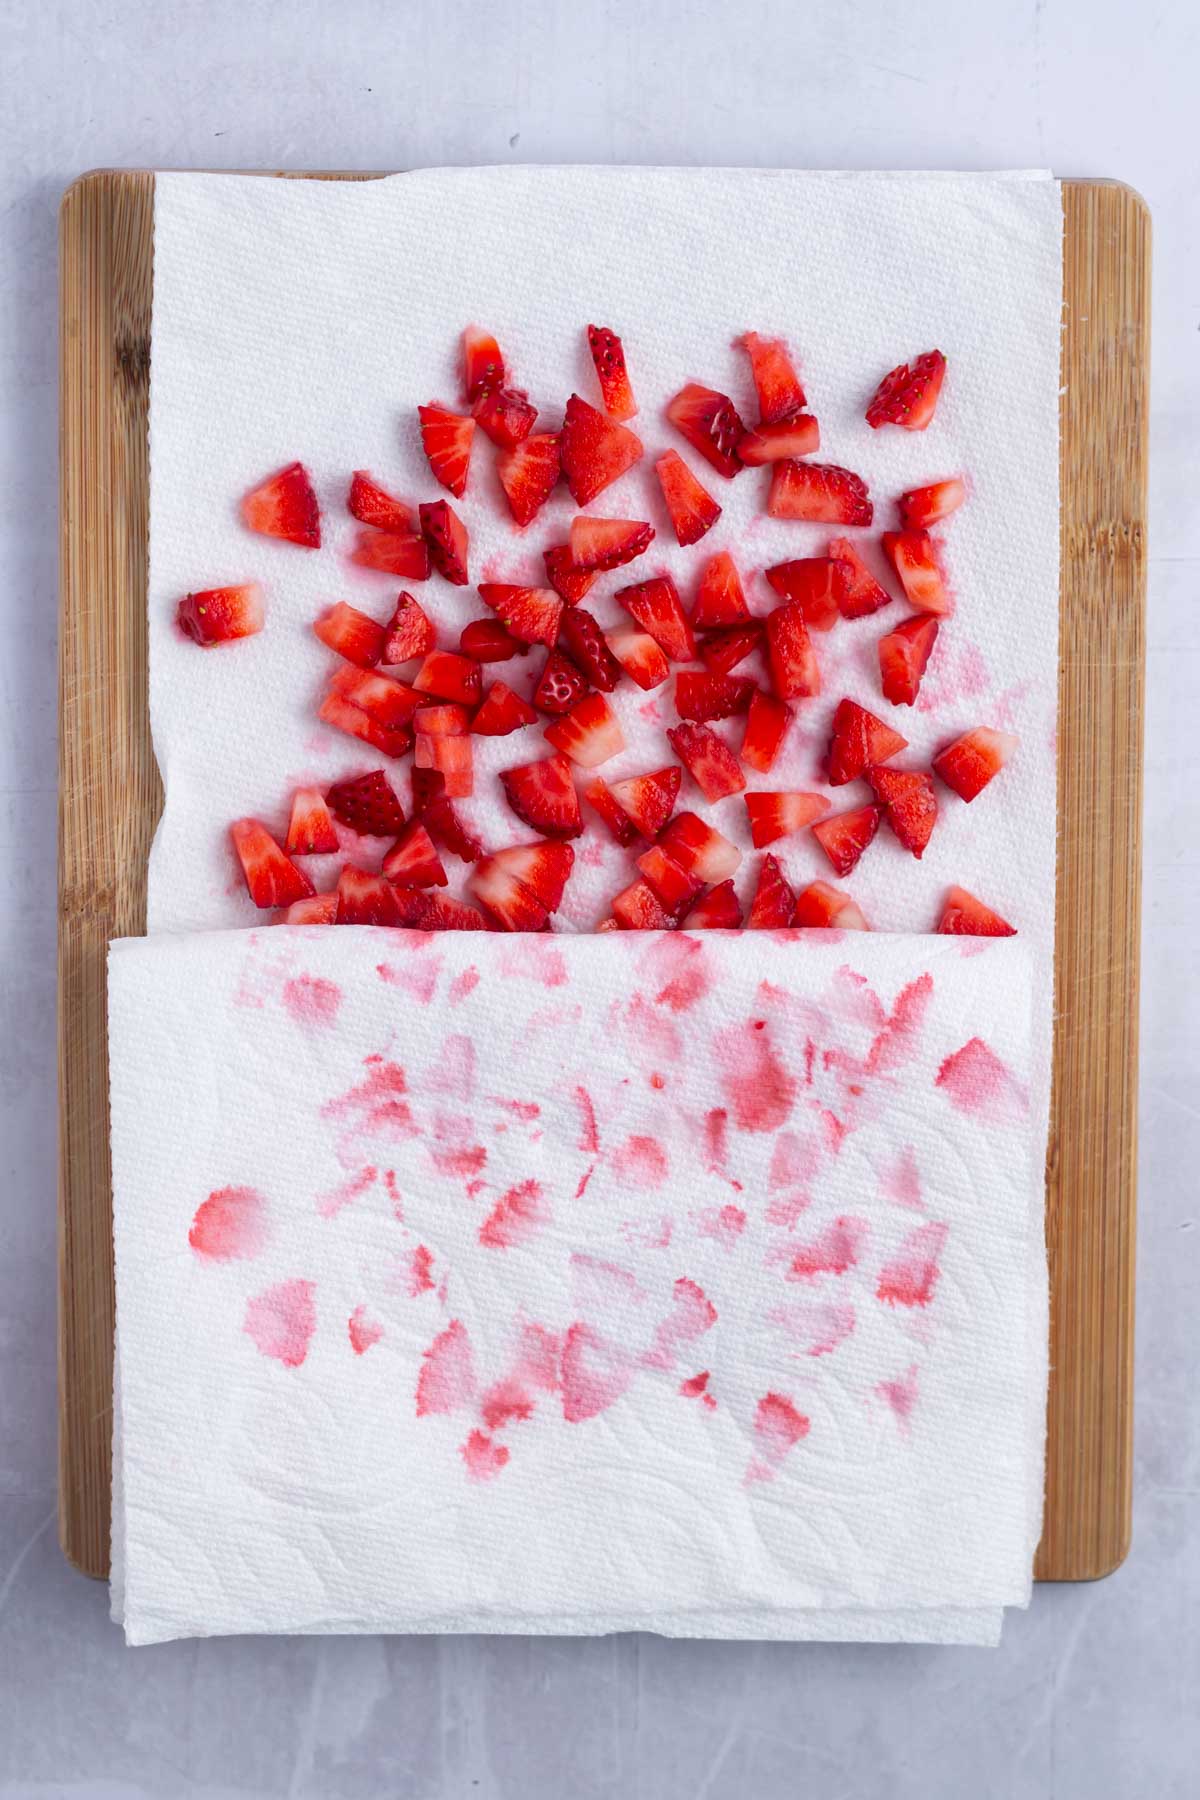 chopped strawberries on a paper towel lined cutting board